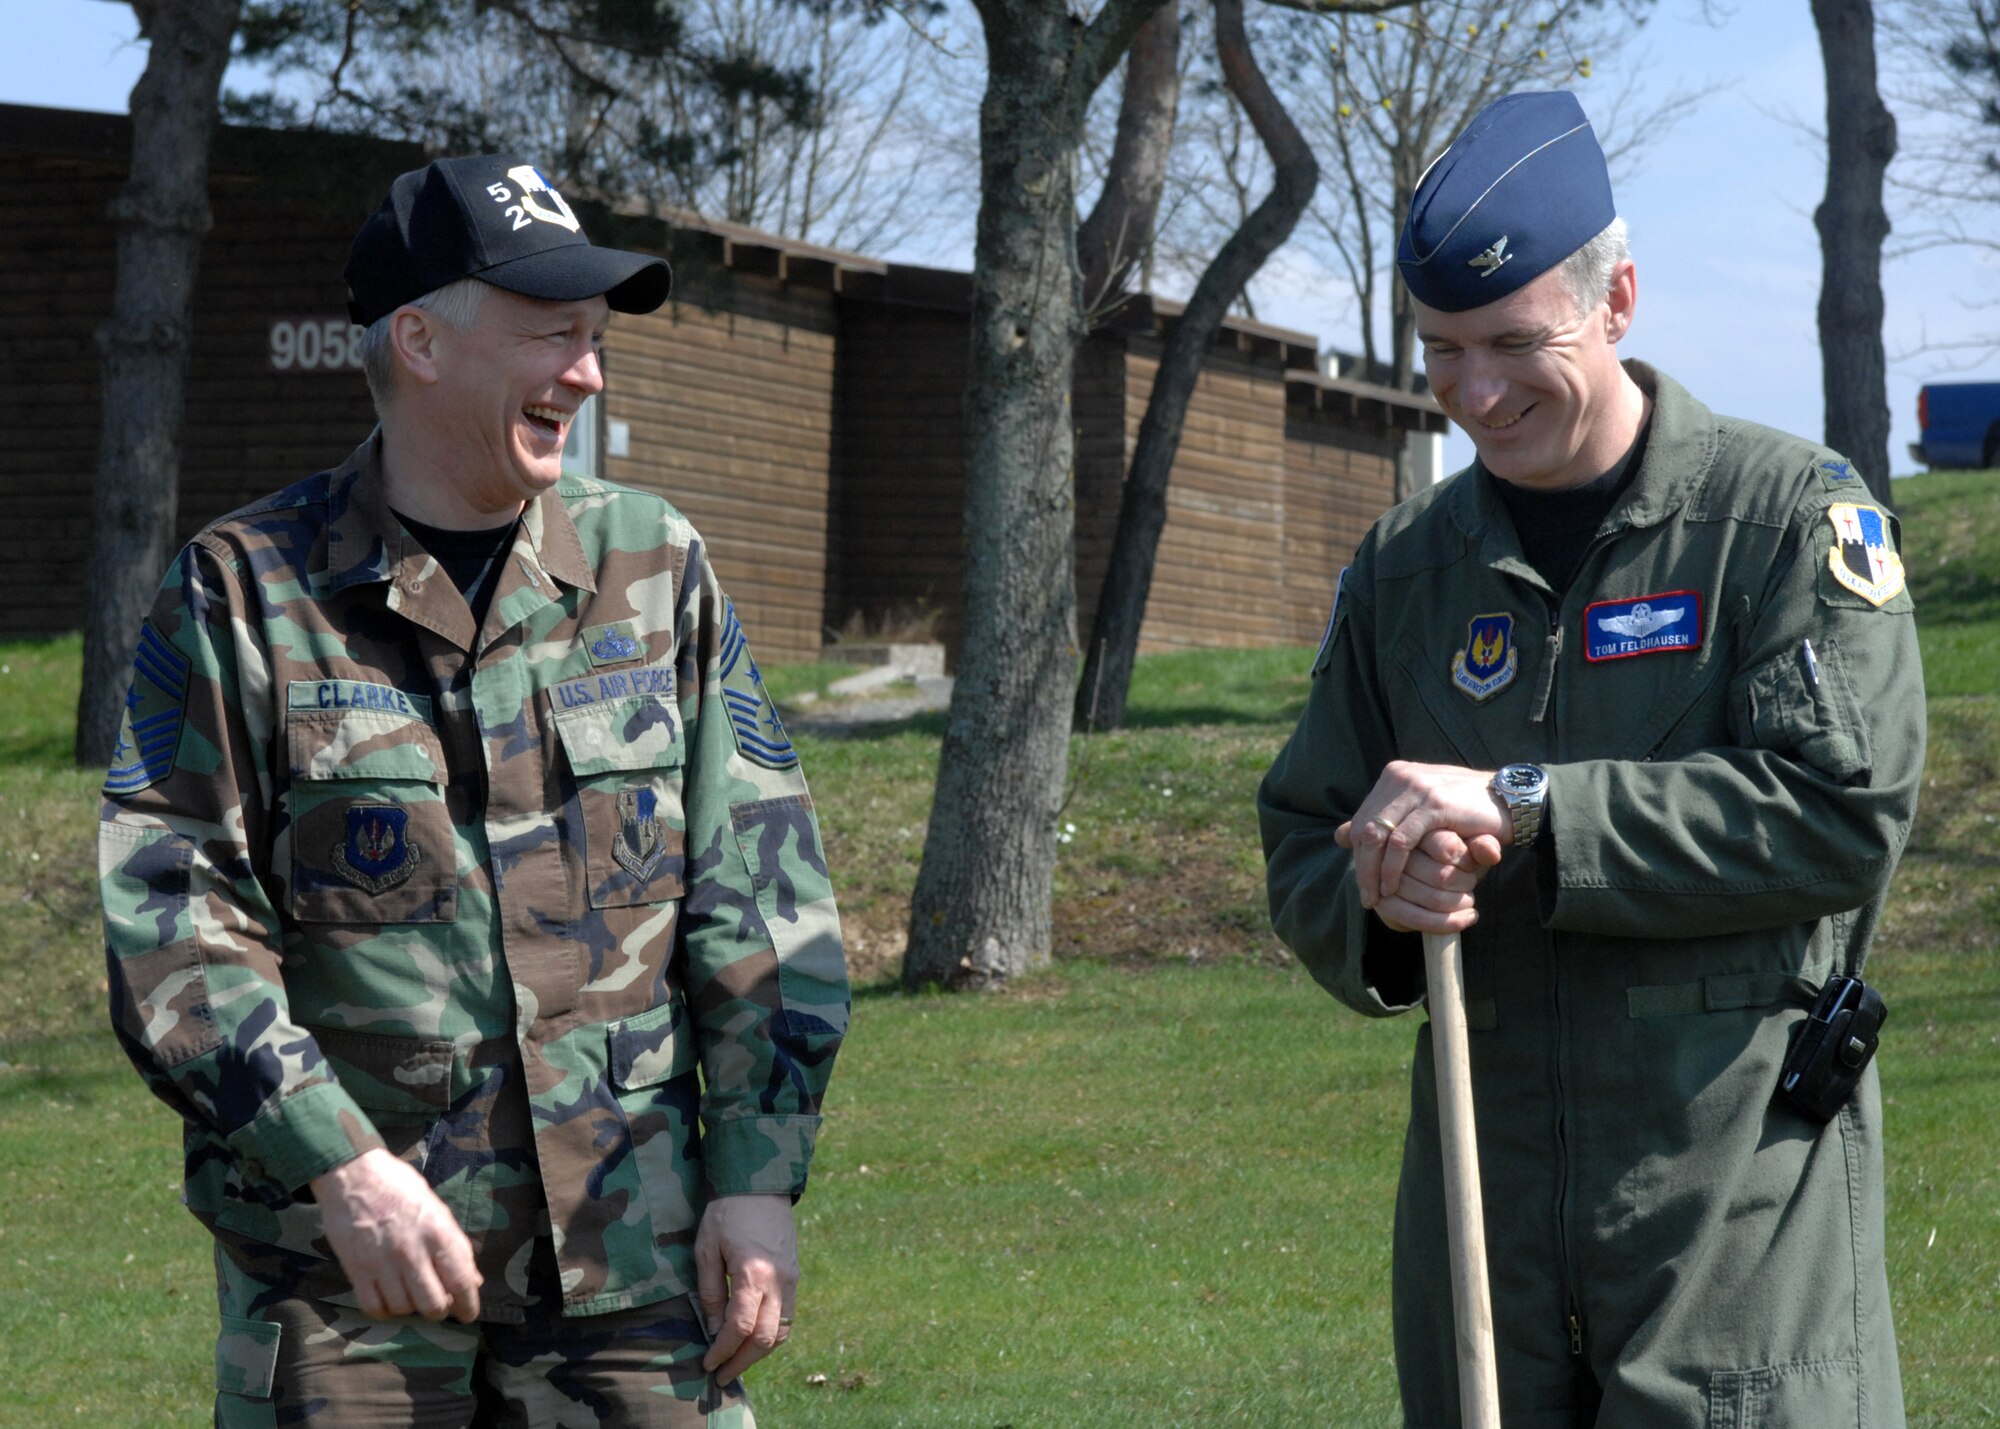 SPANGDAHLEM AIR BASE, Germany -- Col. Thomas Feldhausen, 52nd Fighter Wing commander, and Chief Master Sgt. Vance Clarke, 52nd FW command chief, enjoy the beautiful day after planting trees and shrubberies tree at the Eifel Mountain Golf Course April 18, 2008. Colonel Feldhausen and Chief Clarke planted the trees in honor of Earth Week. (U.S. Air Force Photo/Airman 1st Class Jenifer Calhoun)